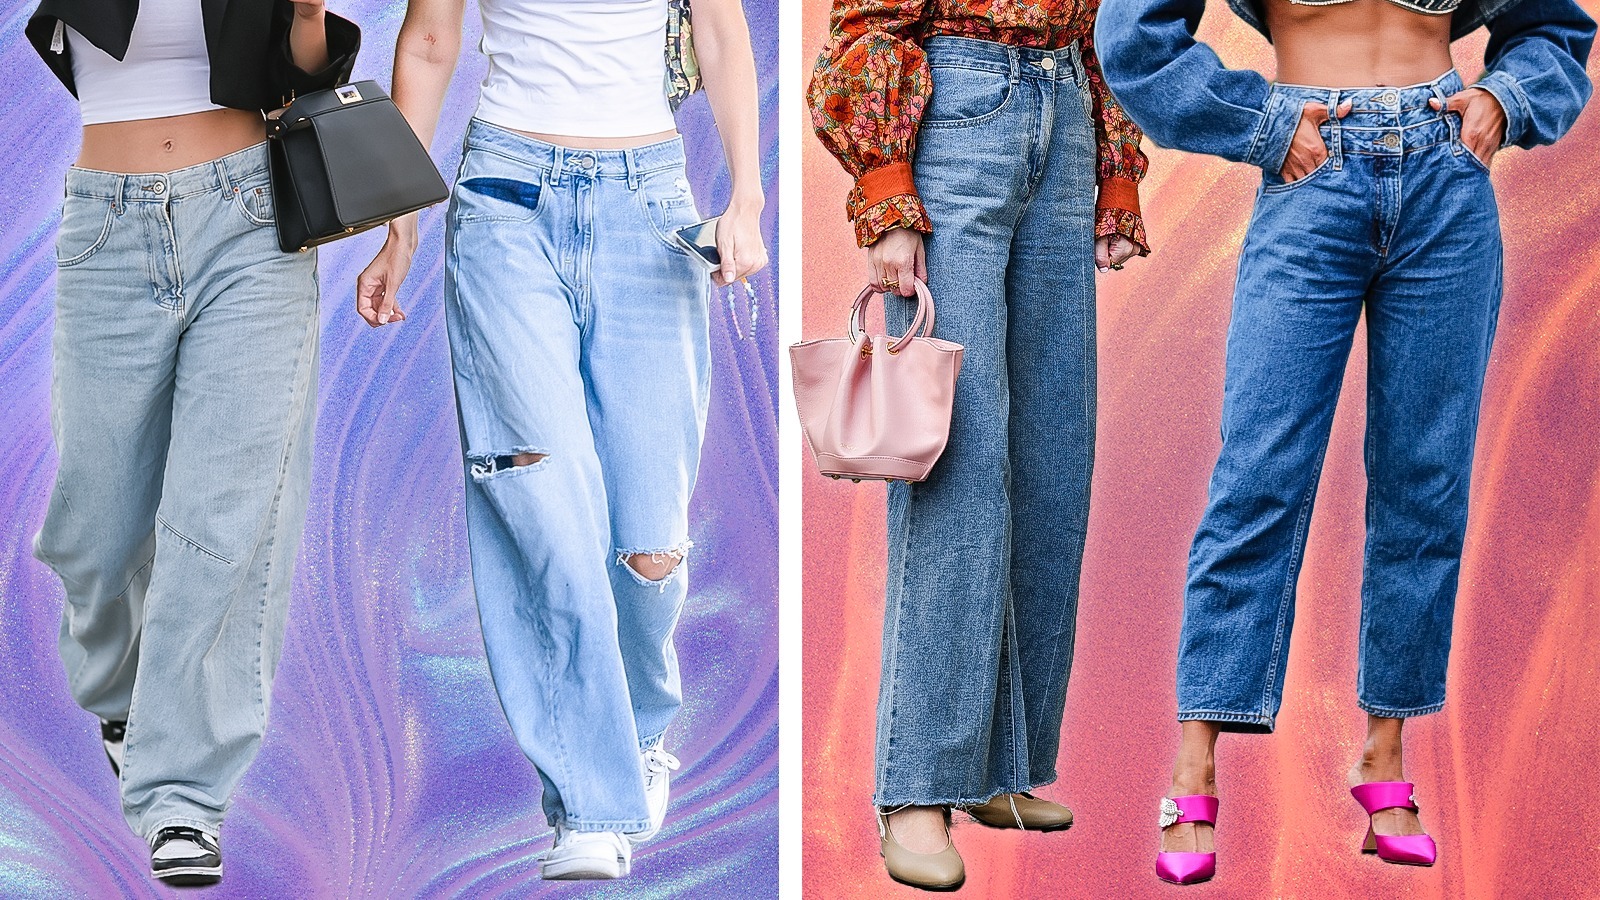 Low-rise jeans are back - Look how GEN Z's millennial style subverts  traditional aesthetics